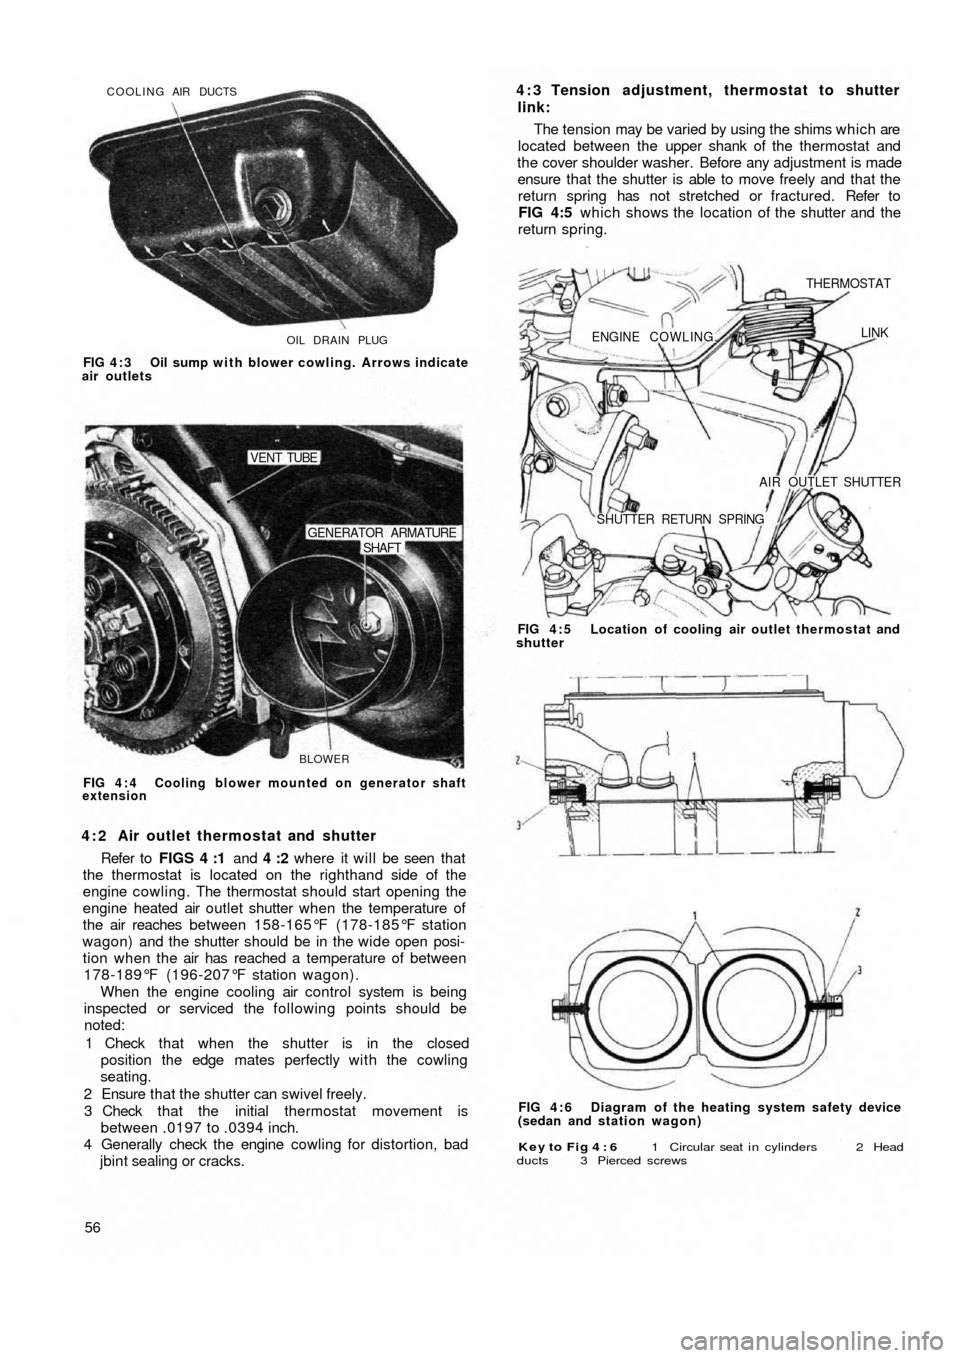 FIAT 500 1959 1.G Service Manual OIL DRAIN PLUG COOLING AIR DUCTS
FIG 4 : 3  Oil sump with blower cowling. Arrows indicate
air outlets
BLOWER
SHAFT GENERATOR ARMATURE
VENT TUBE
FIG 4 : 4  Cooling blower mounted on generator shaft
ext